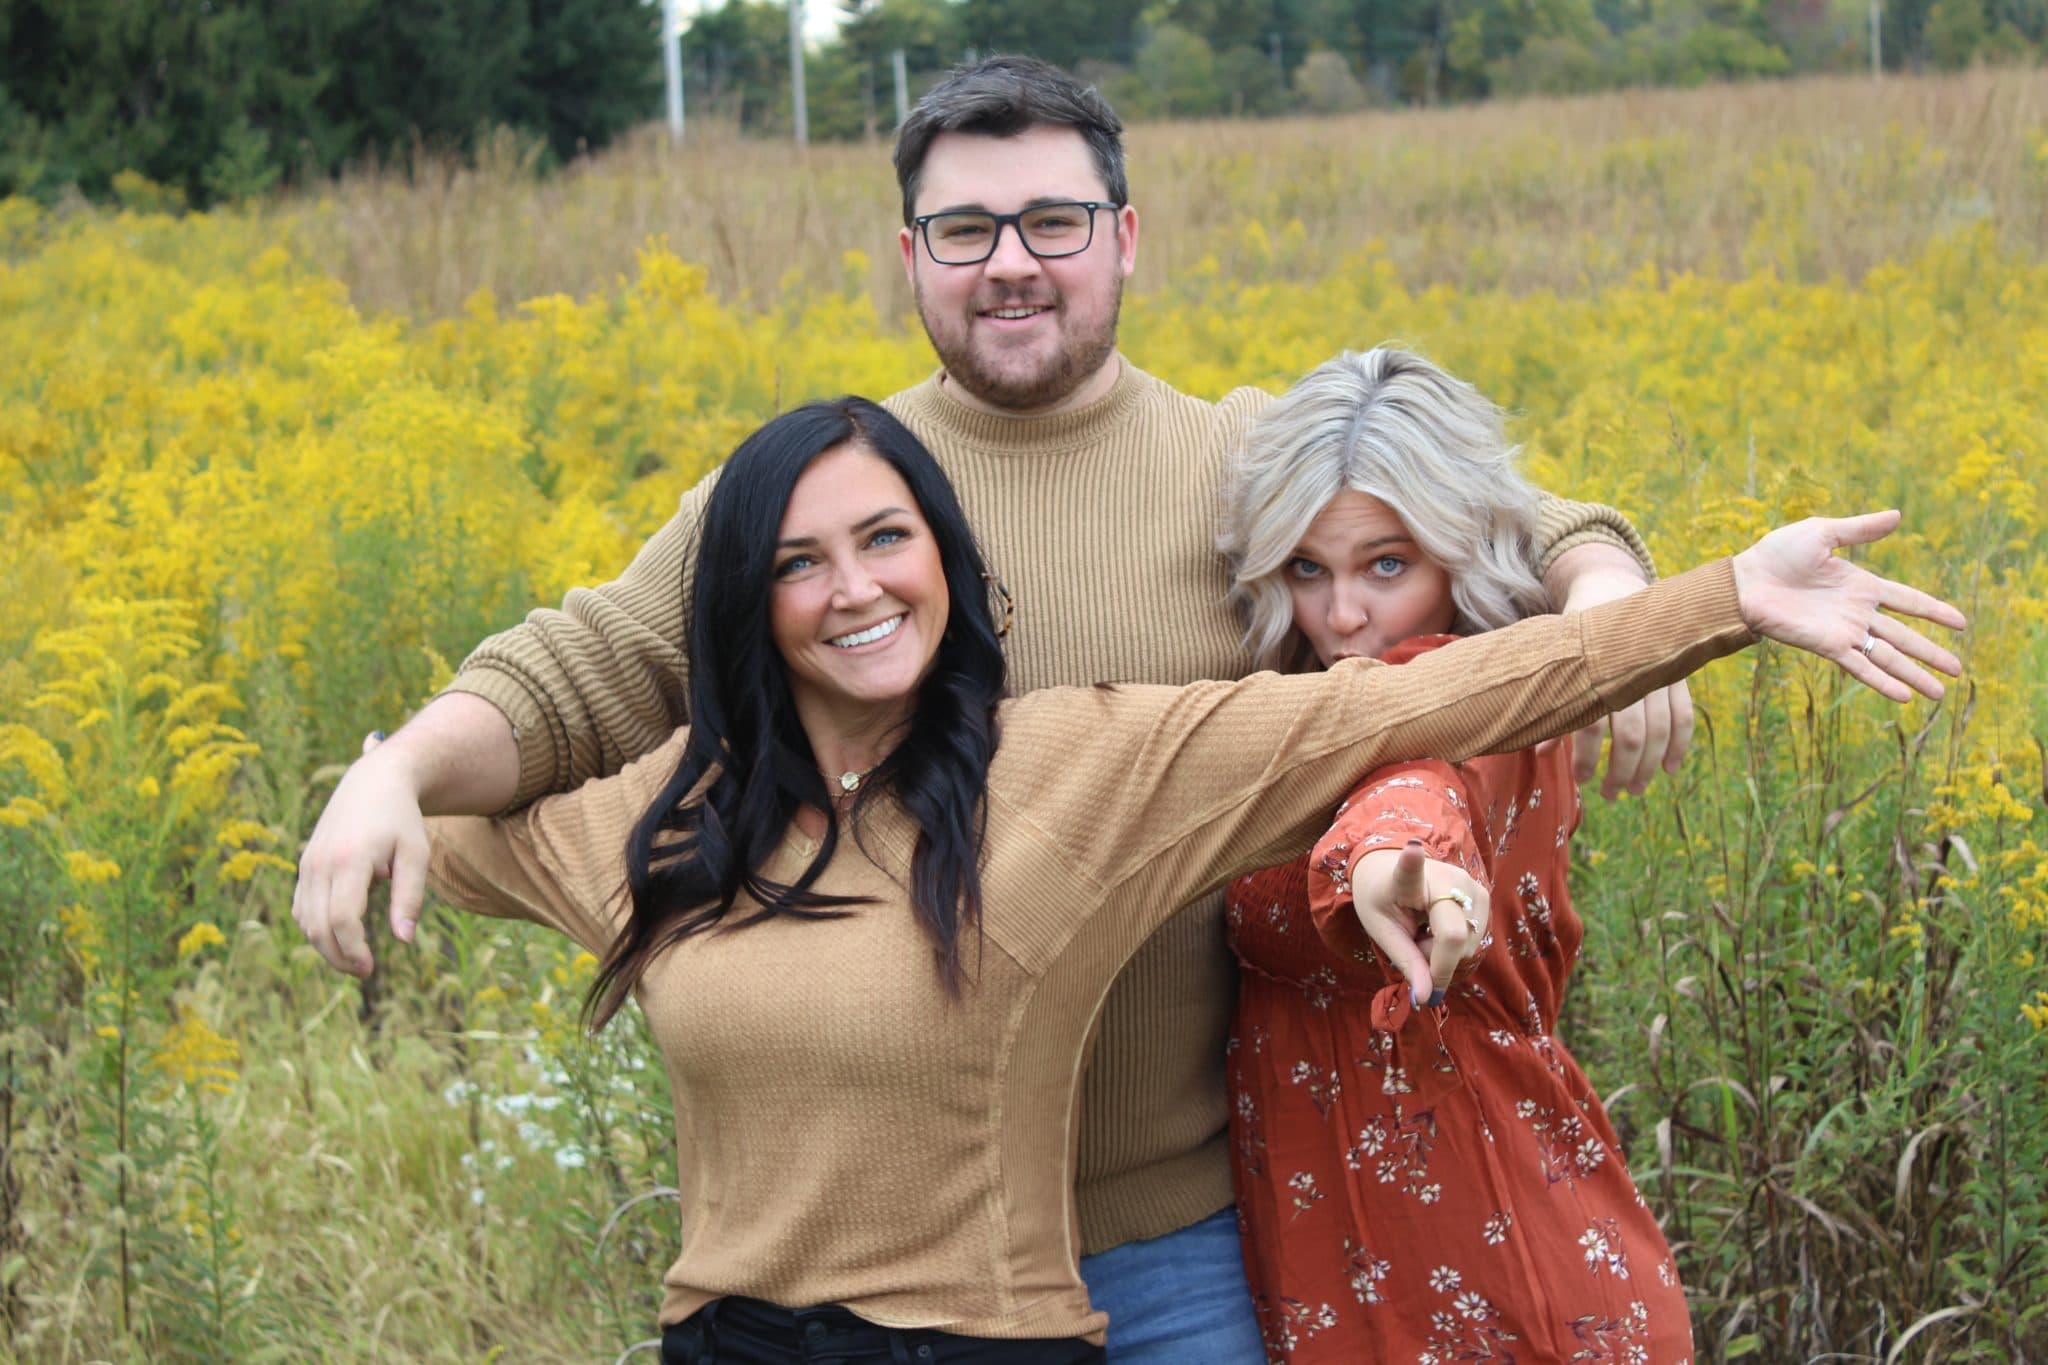 Large Family, Ohio Family Fall Pictures, Stilettos and Diapers, Siblings